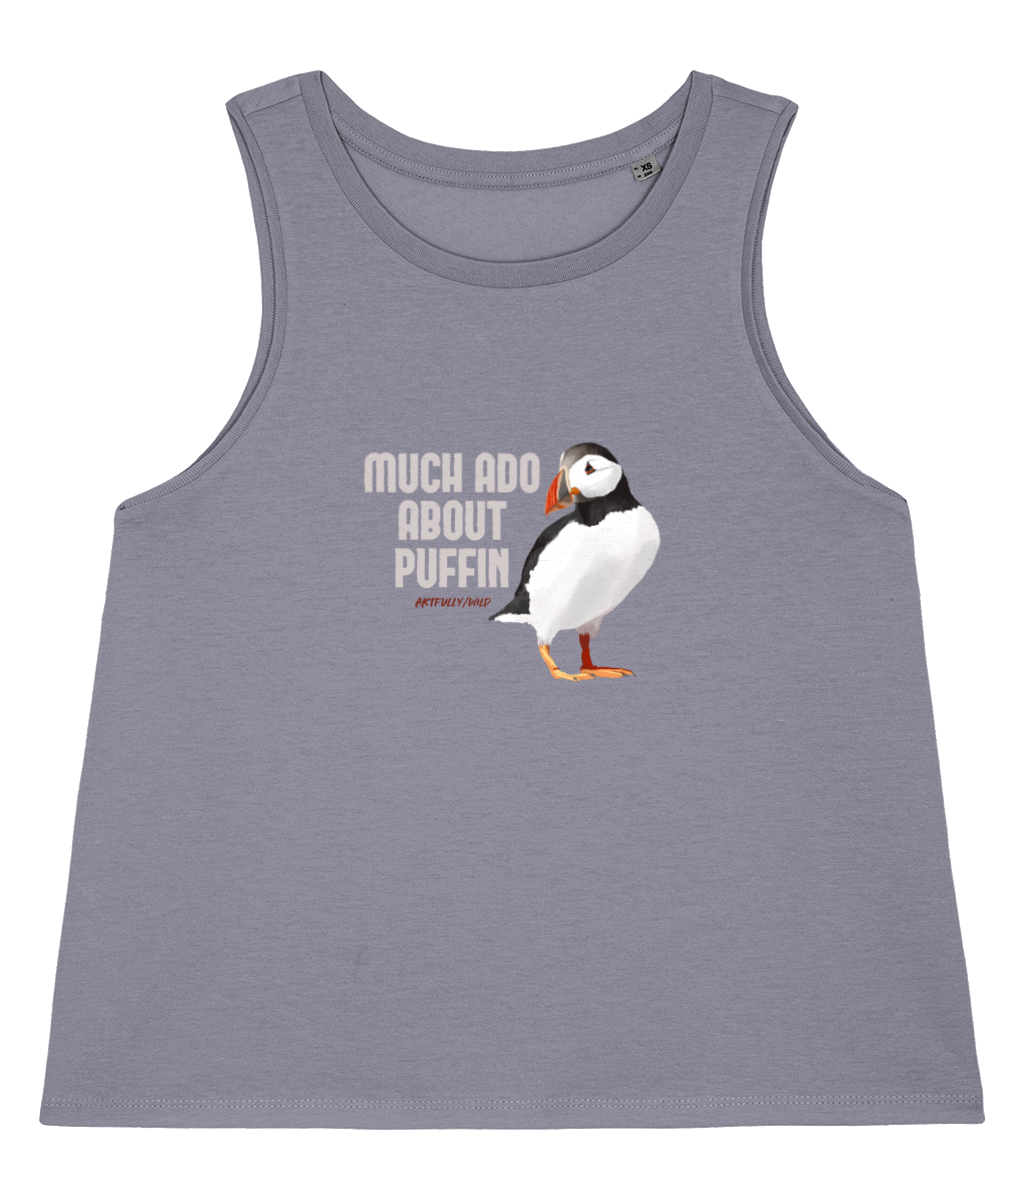 MUCH ADO ABOUT PUFFIN Organic Sleeves Tank Top [WOMEN]